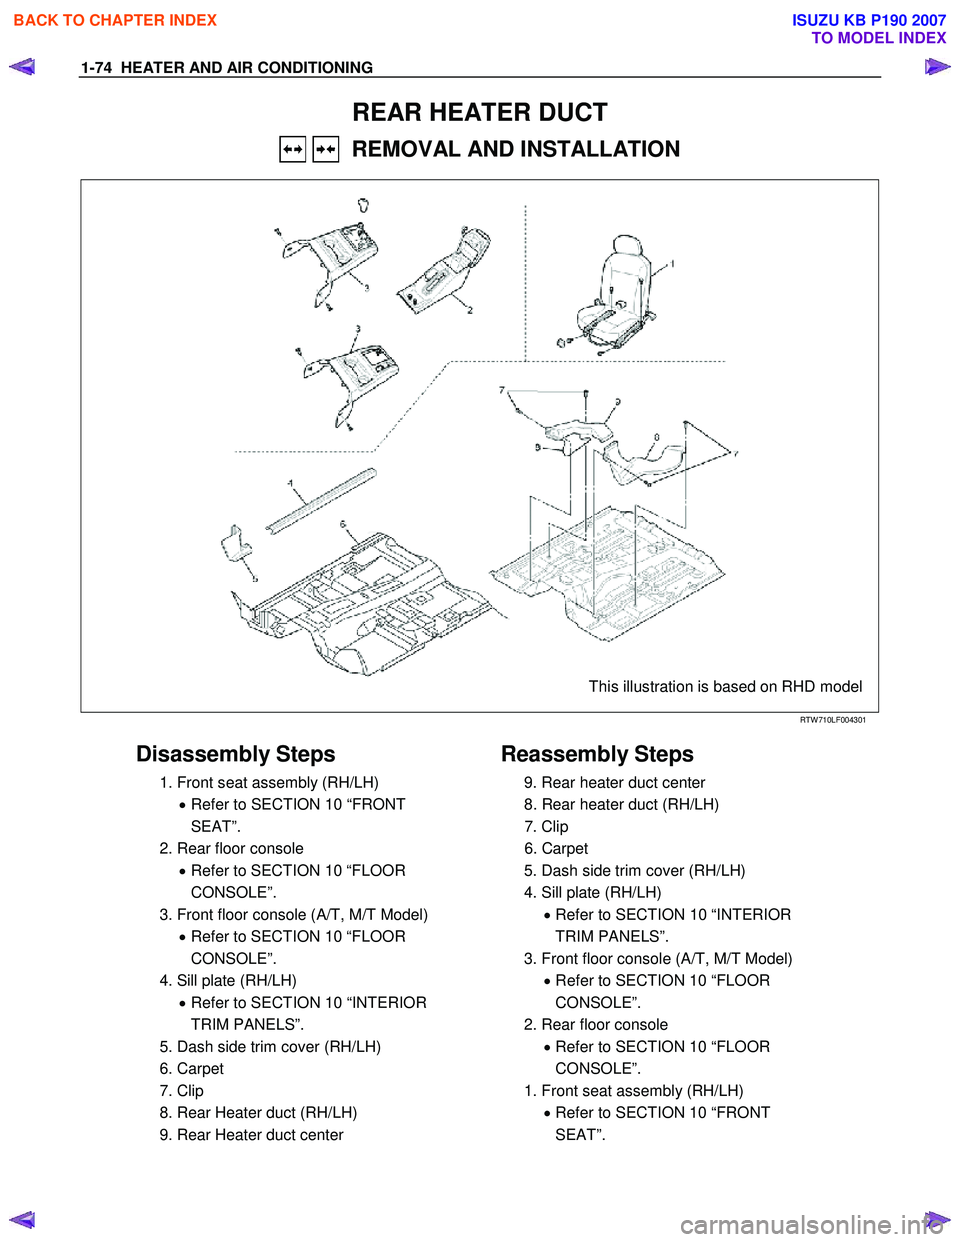 ISUZU KB P190 2007  Workshop Repair Manual 1-74  HEATER AND AIR CONDITIONING 
REAR HEATER DUCT 
   REMOVAL AND INSTALLATION 
  
 
This illustration is based on RHD model 
 
RTW 710LF004301 
 
Disassembly Steps 
  1. Front seat assembly (RH/LH)